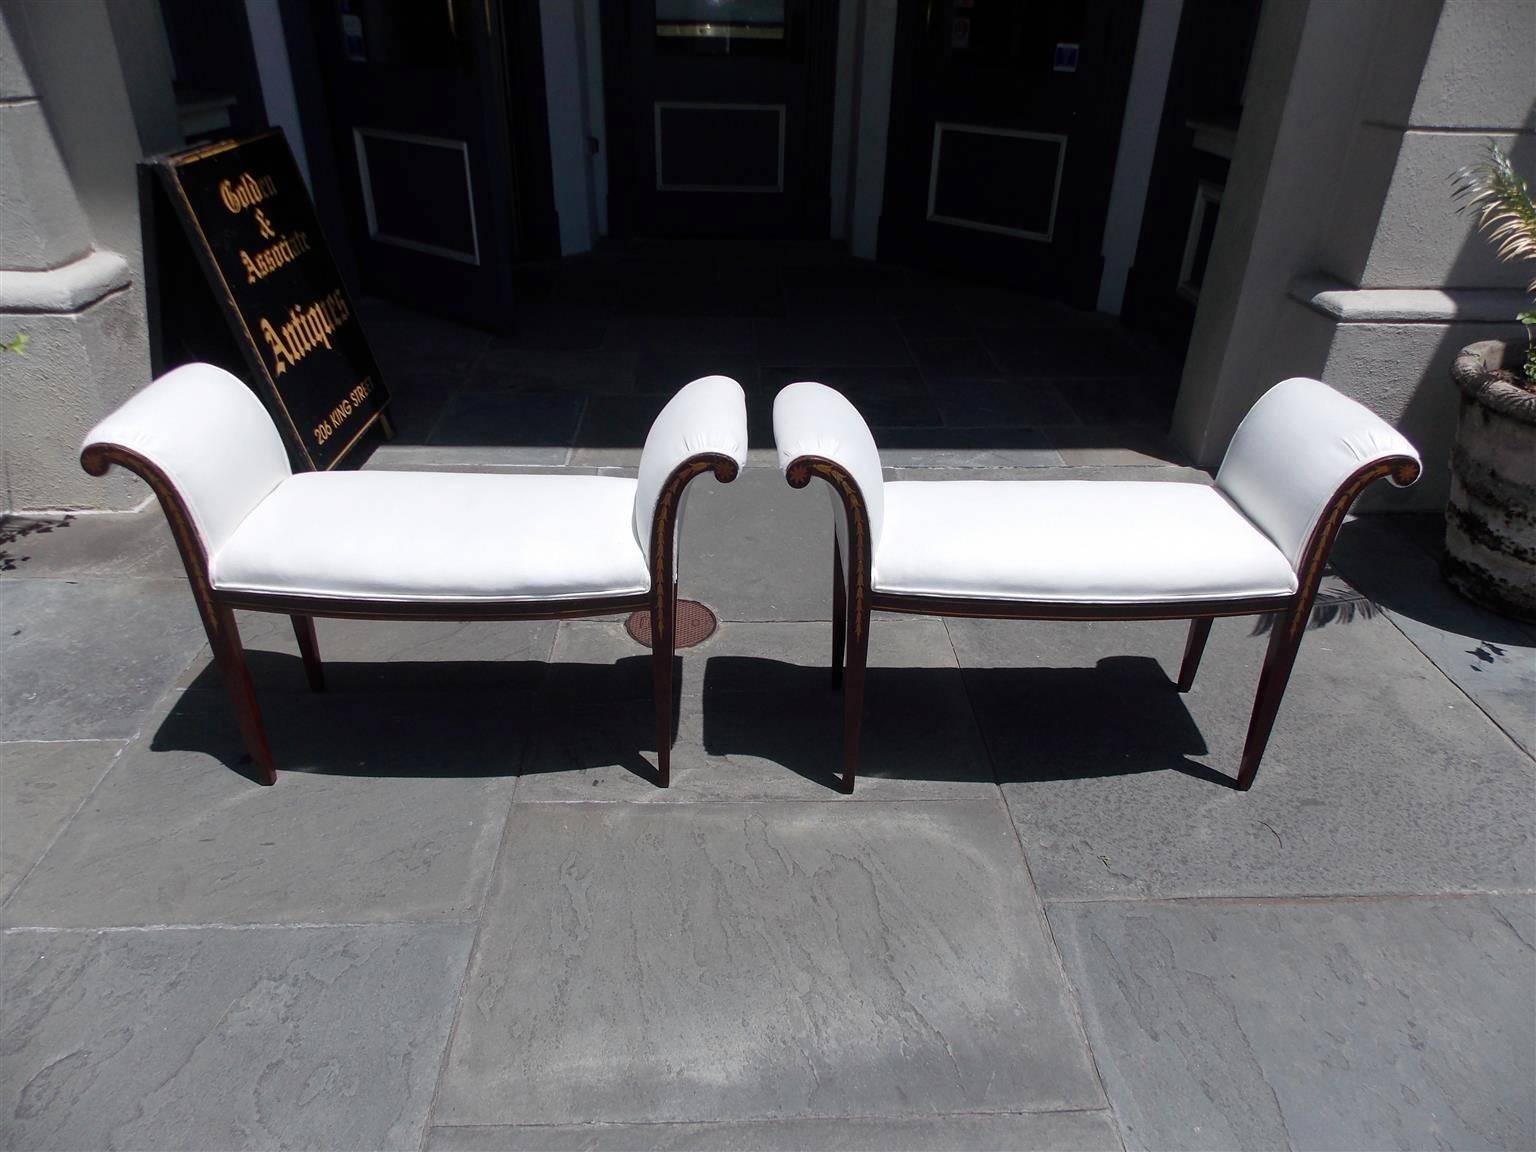 Pair of English mahogany window benches with flanking scrolled arms, floral medallions, graduated satinwood inlaid bell flowers, and terminating on tapered squared legs. Benches are upholstered in white muslin, Early 19th century.